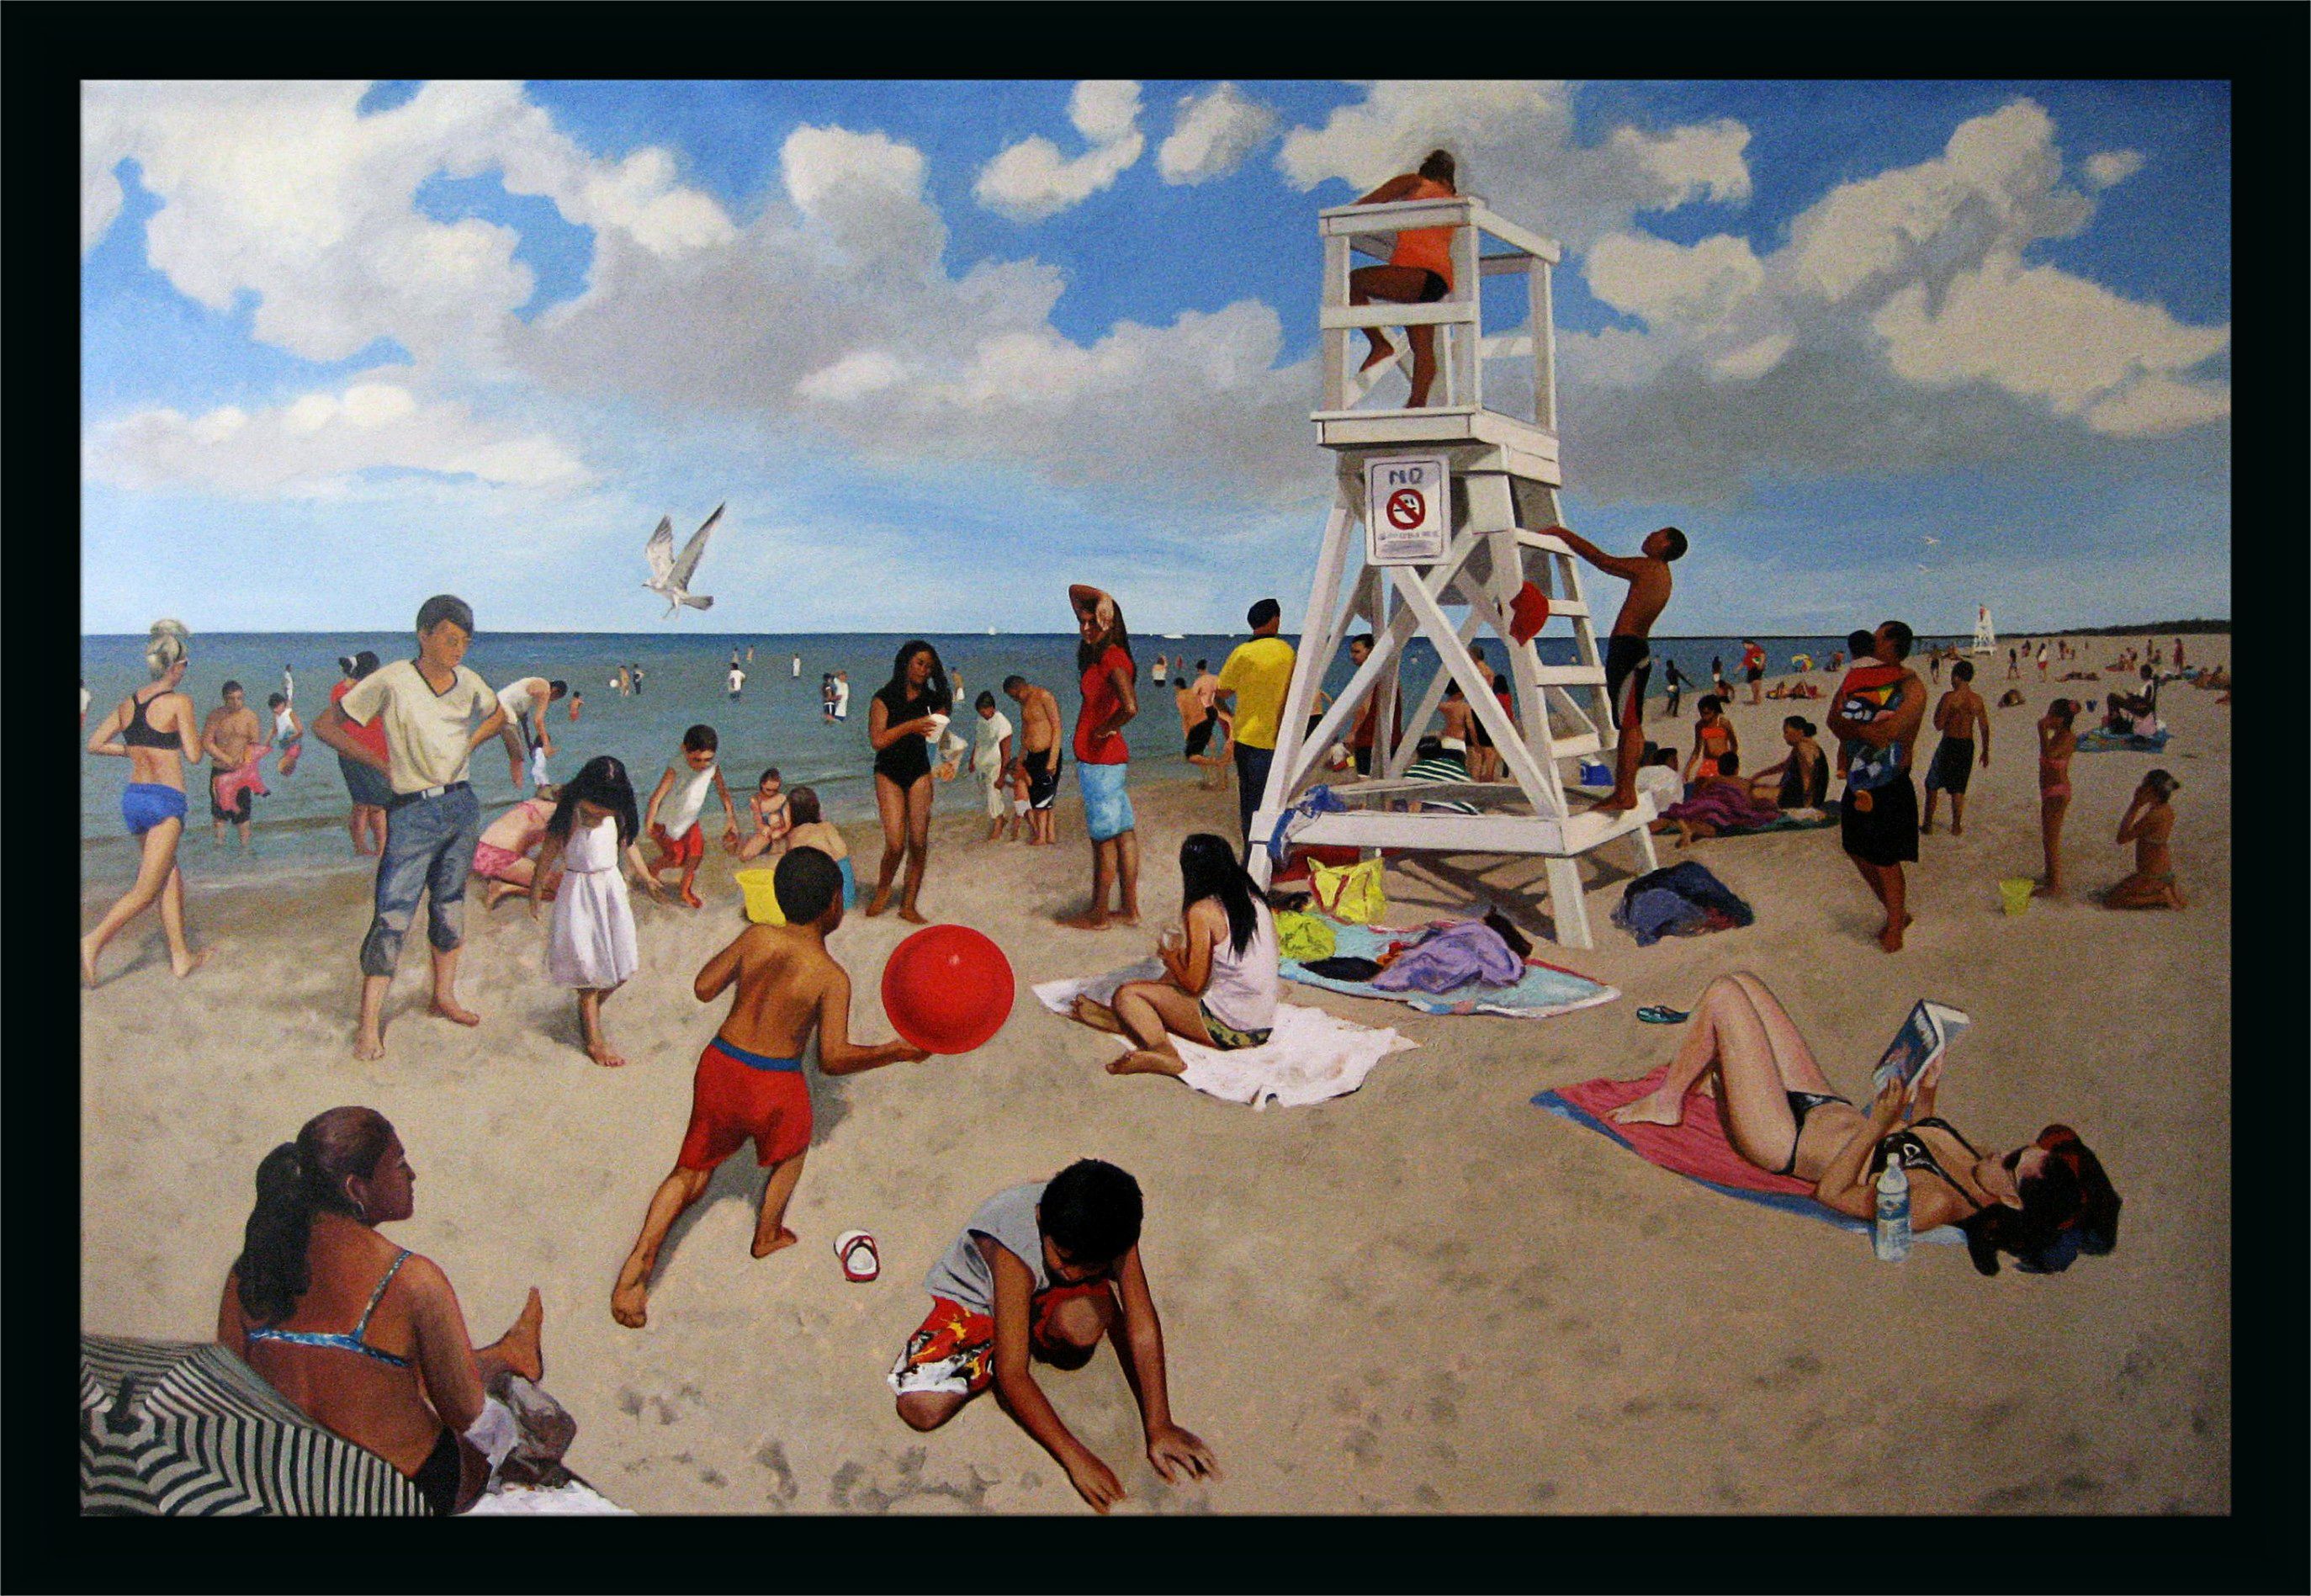 Montrose Beach, Day of Chicago Air and Water Show 2010  8 feet by 12 feet  oil on canvas by Ann Ponce